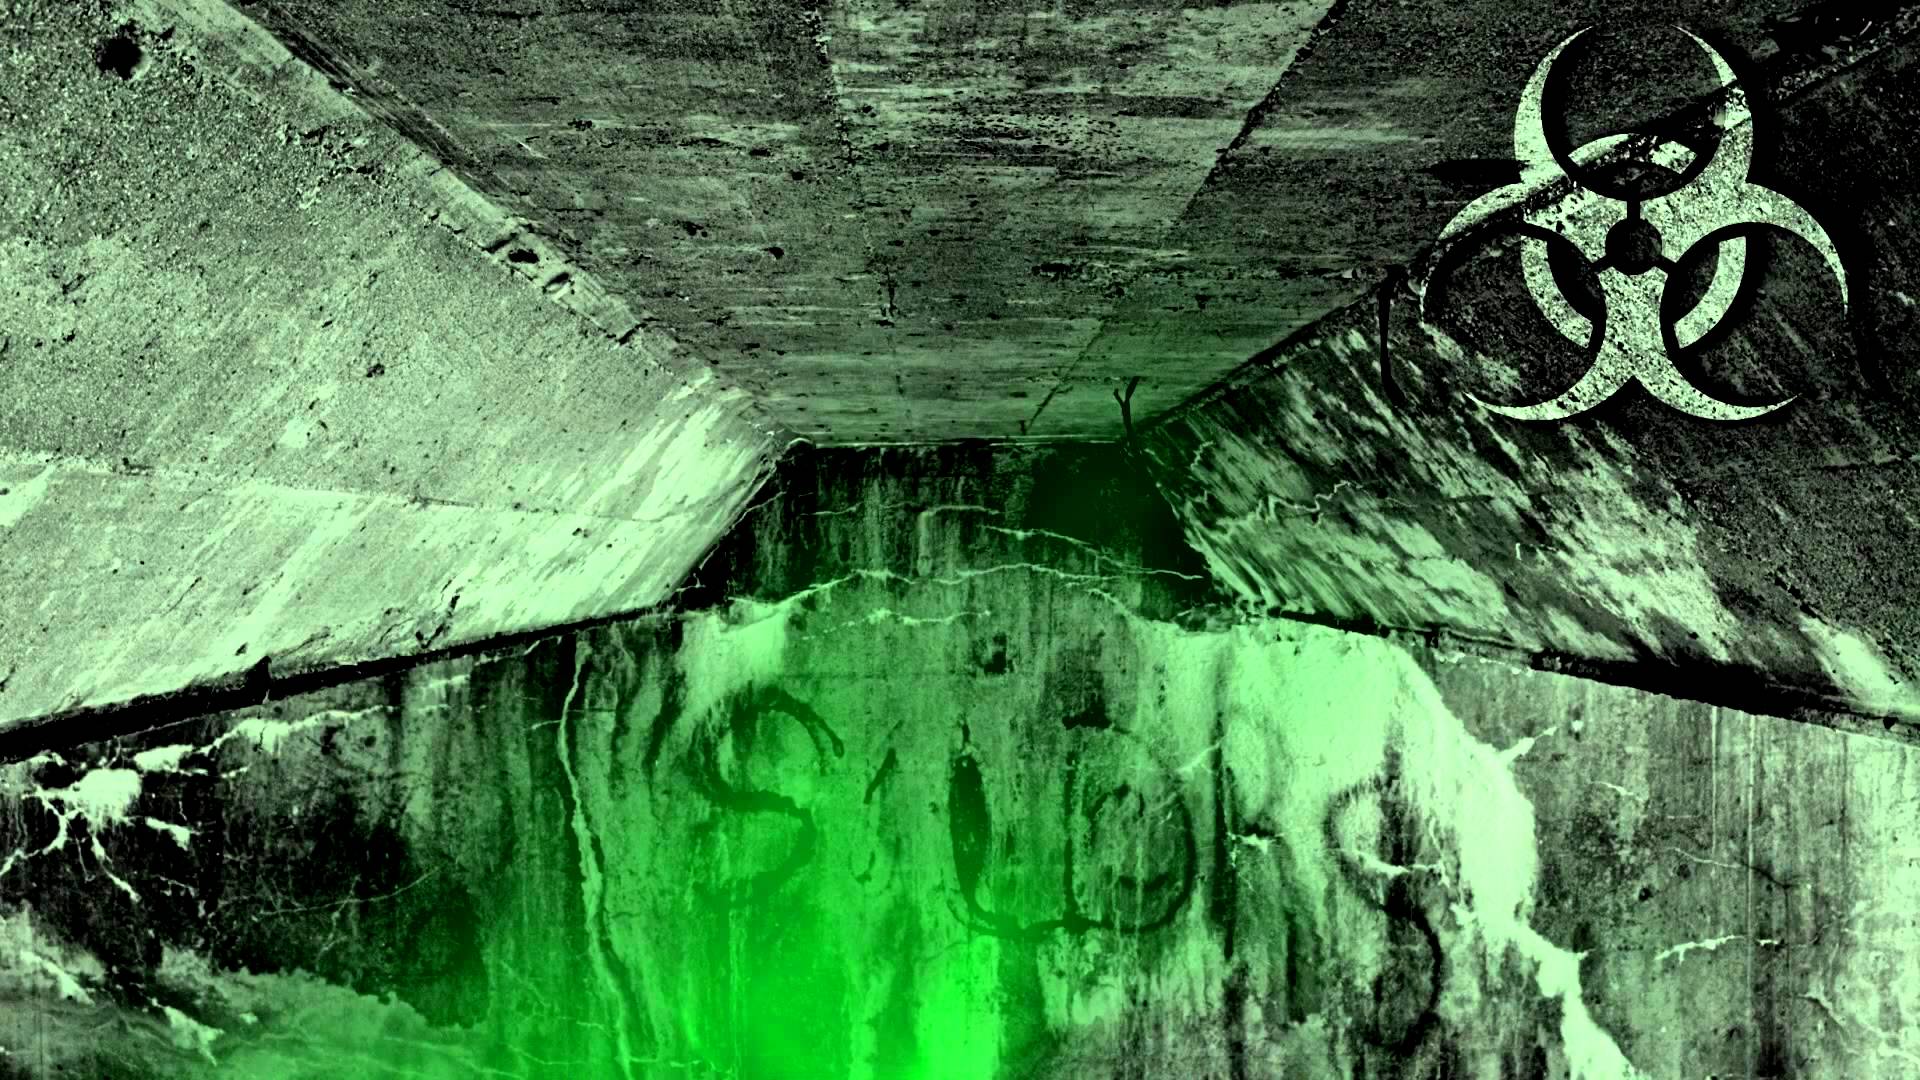 Royalty Free Stock Footage HD Video Clip 'Toxic Waste Dump Sewer